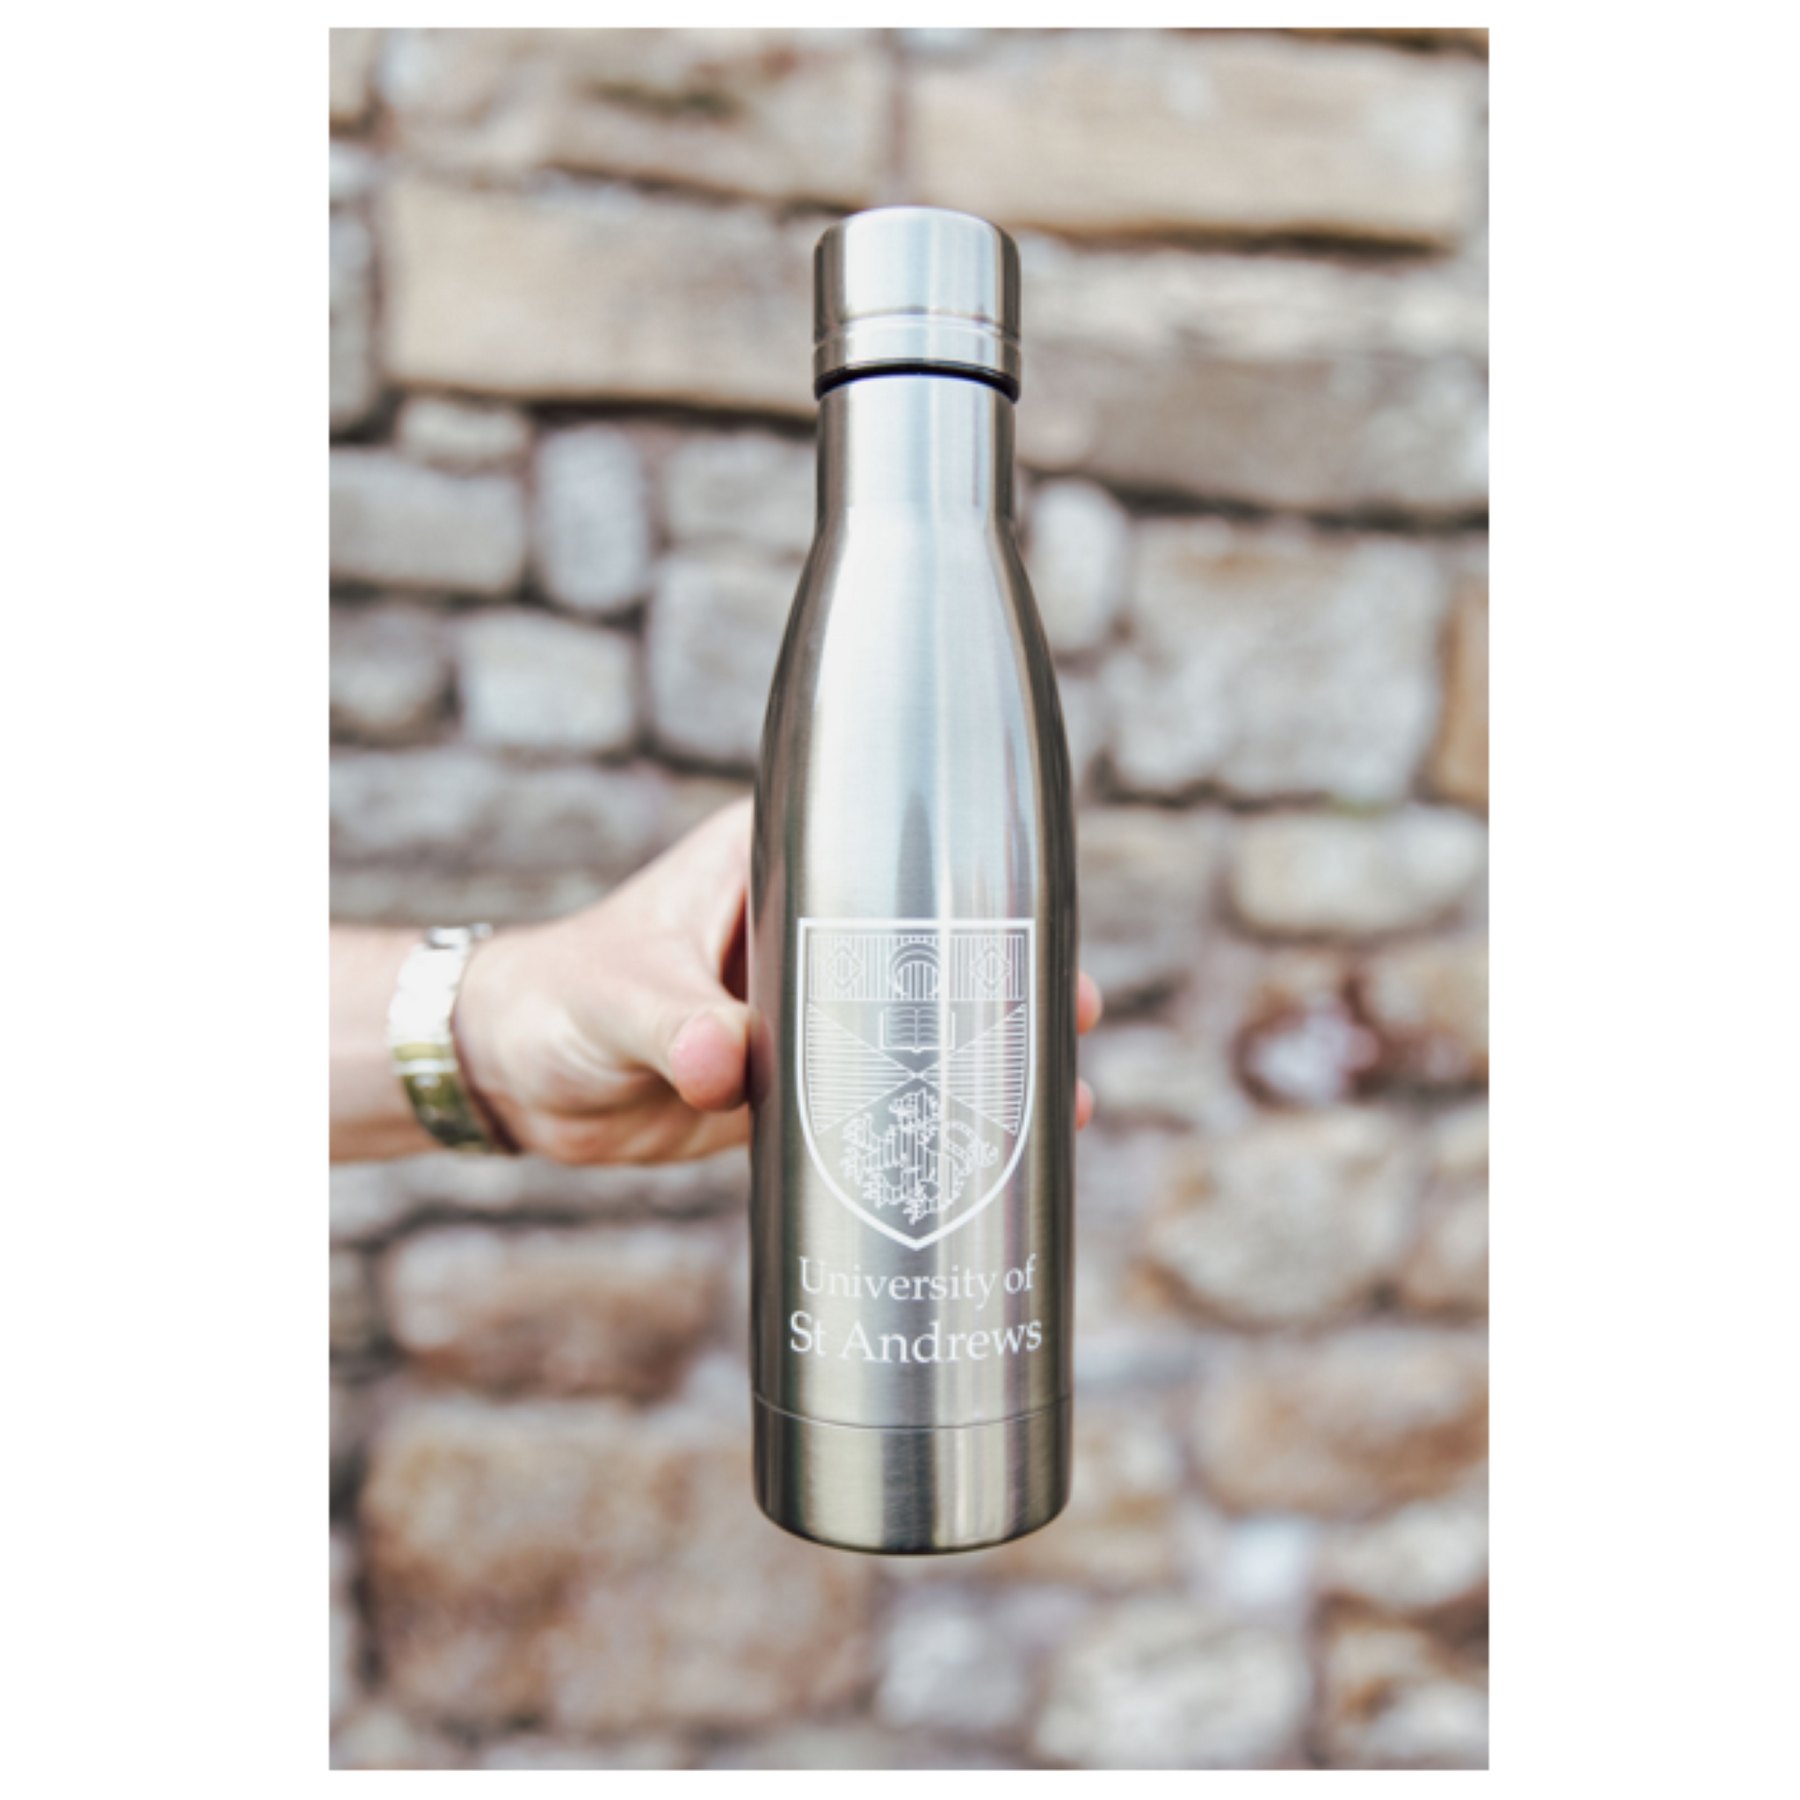 Chilly's Thermal Bottle - The University of Edinburgh – The University of  Edinburgh Gift Shop